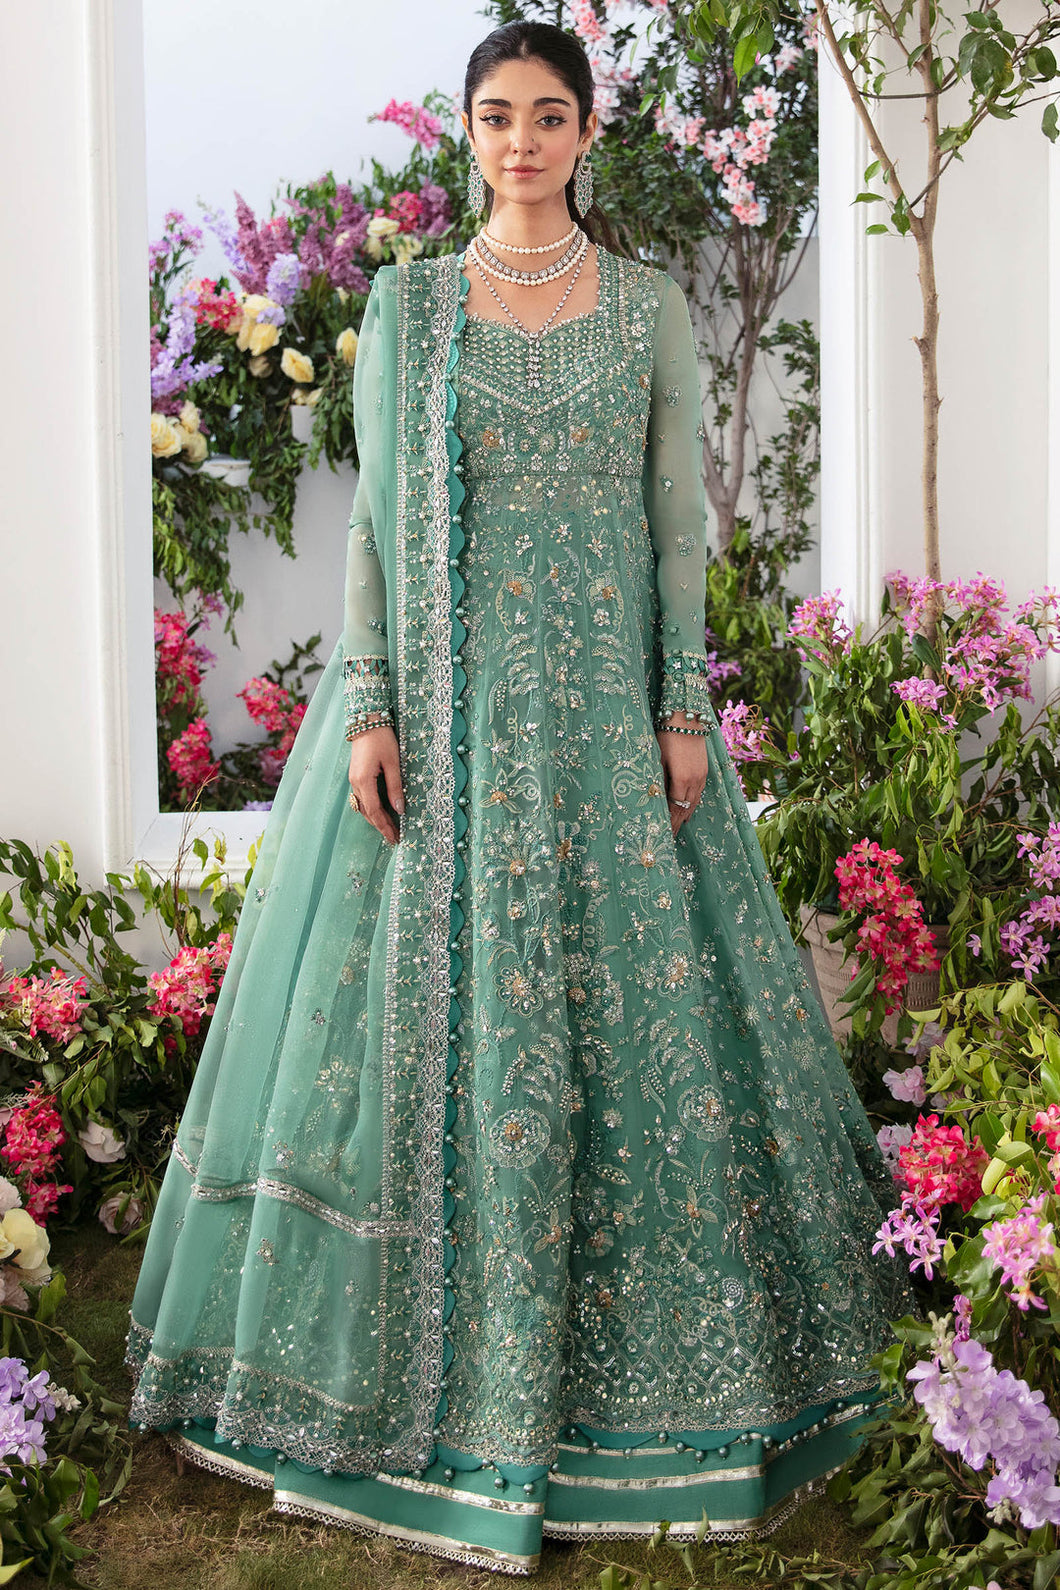 Buy ZAHA | GOSSAMER WINTER '23 Online Pakistani designer dresses at Great Price! Available For Next Day Delivery in UK, France & Germany. Zaha dresses created by Khadija Shah from Pakistan & for SALE in the UK, USA, Manchester & London. Book now ready to wear & unstitched at Lebaasonline.